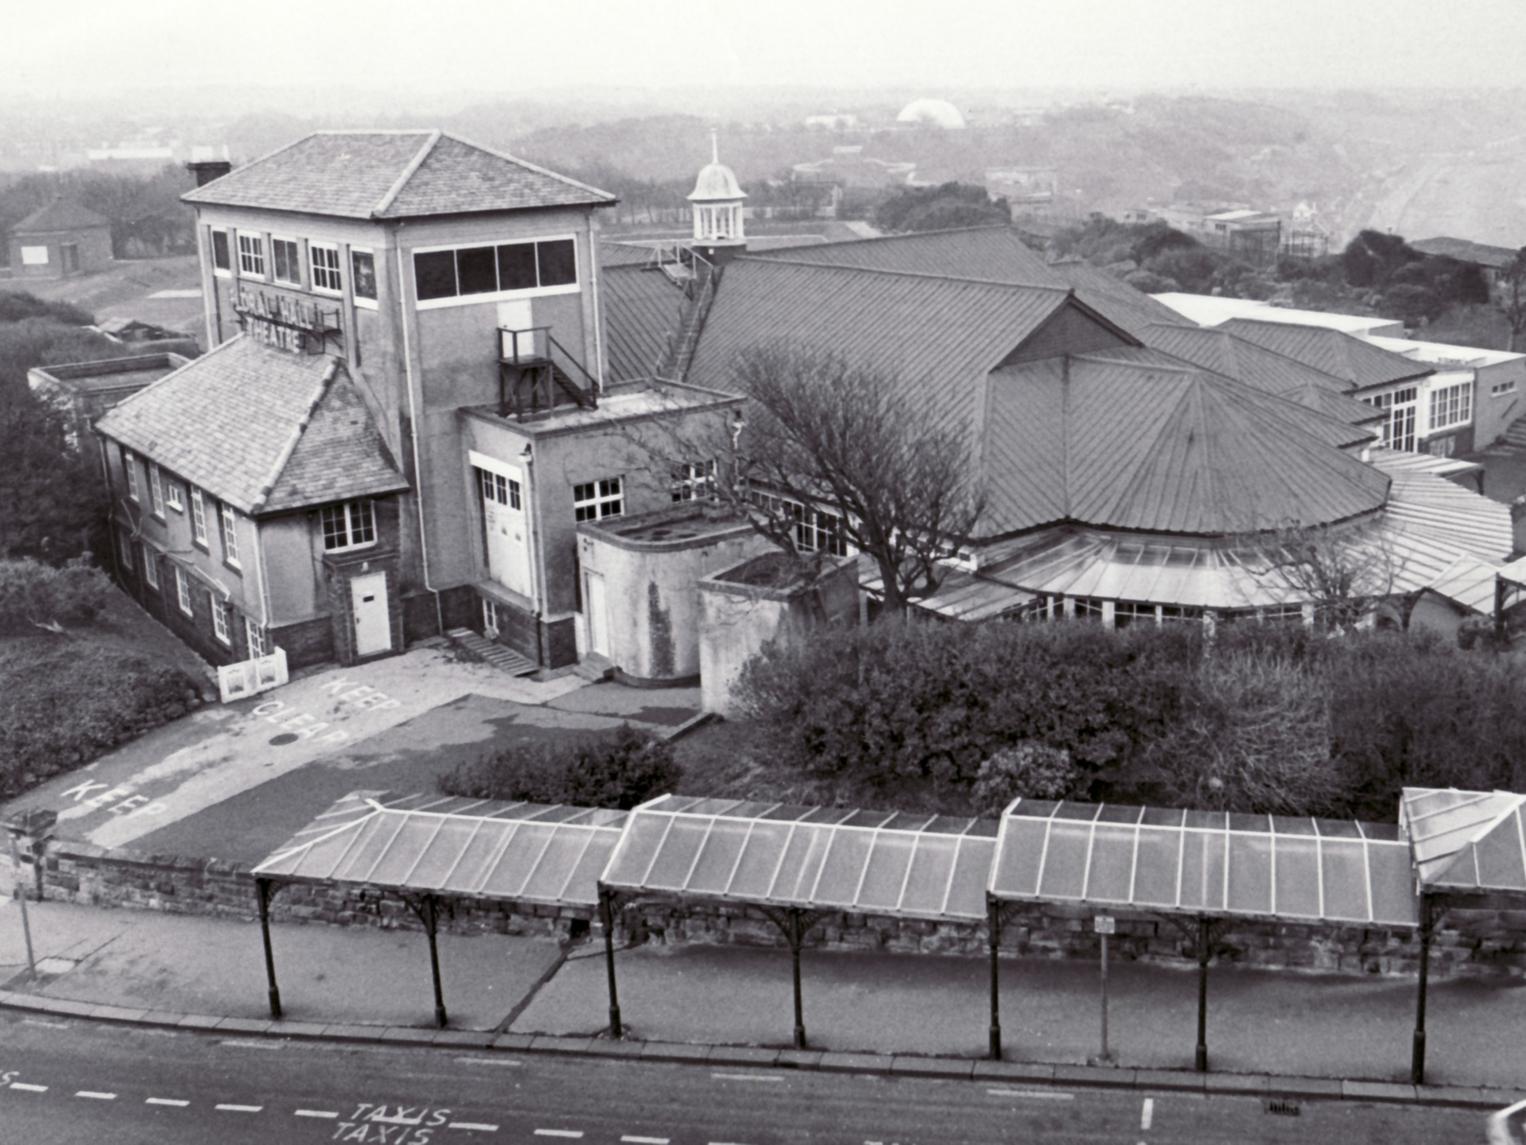 This entertainment venue situated within Alexandra Gardens on the North side was knocked down in 1989 and replaced by what is now Scarborough Bowls Centre.